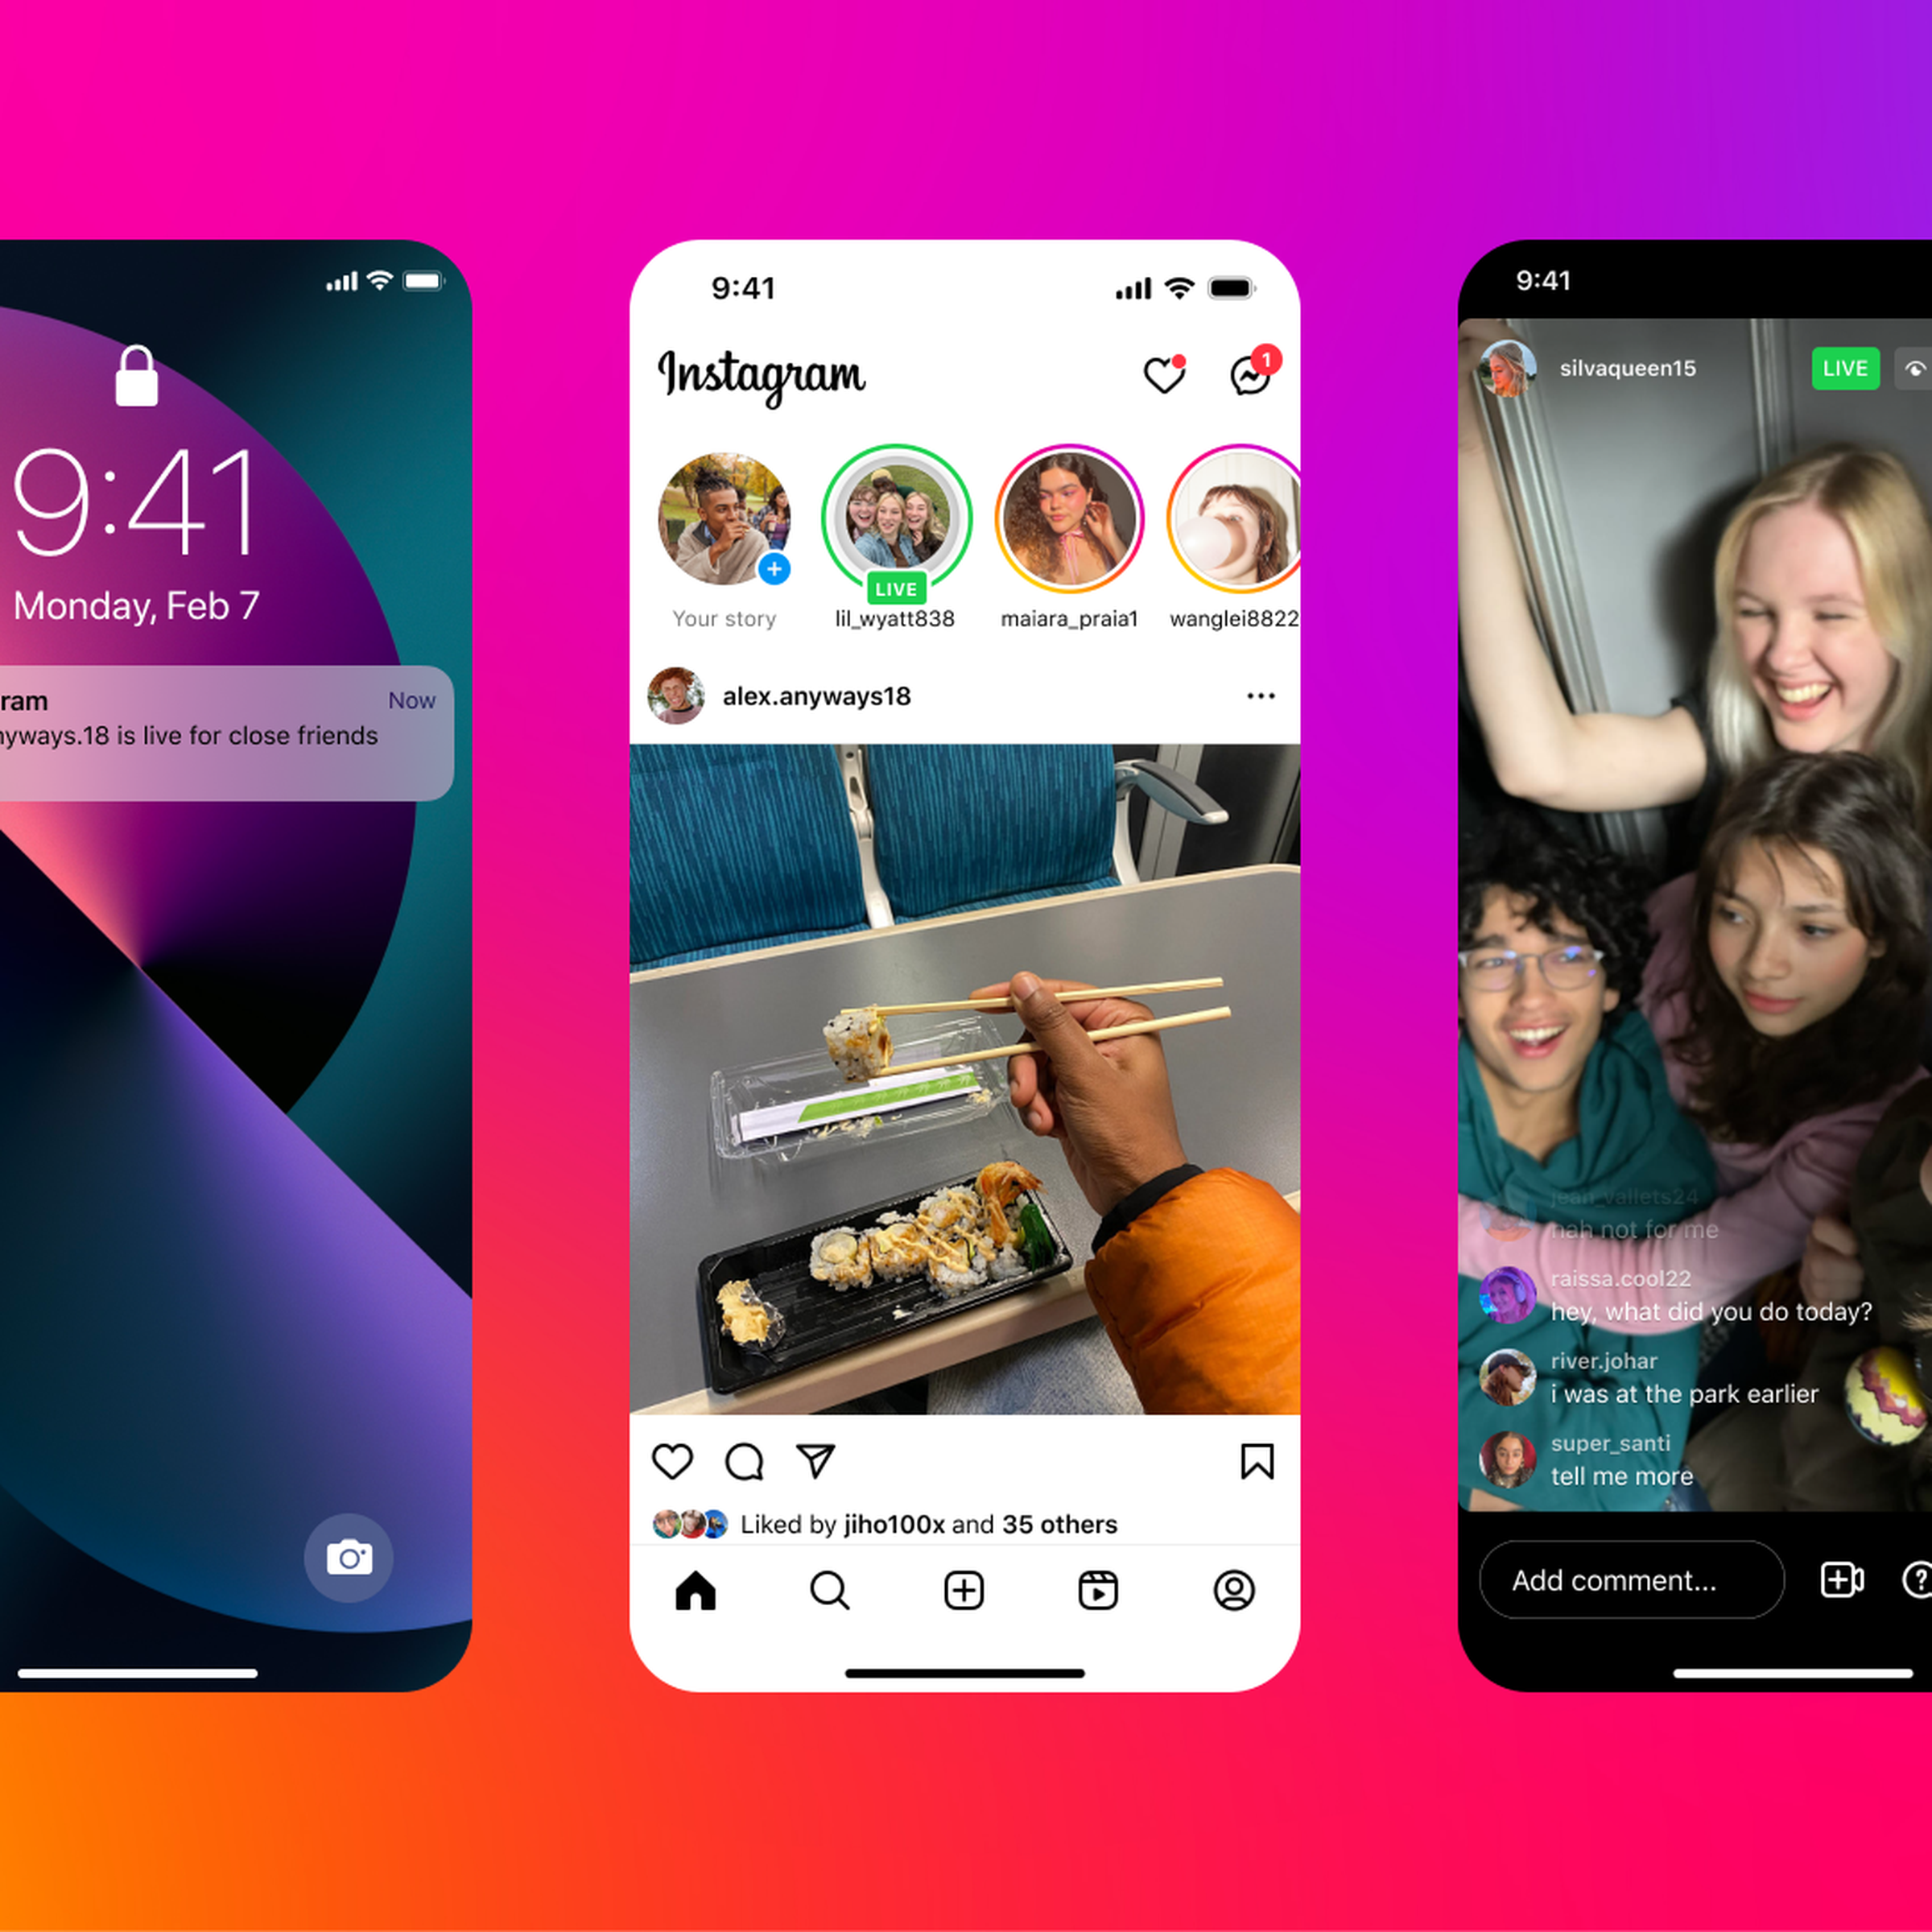 Instagram Live video stream alerts and displays for Close Friends only.